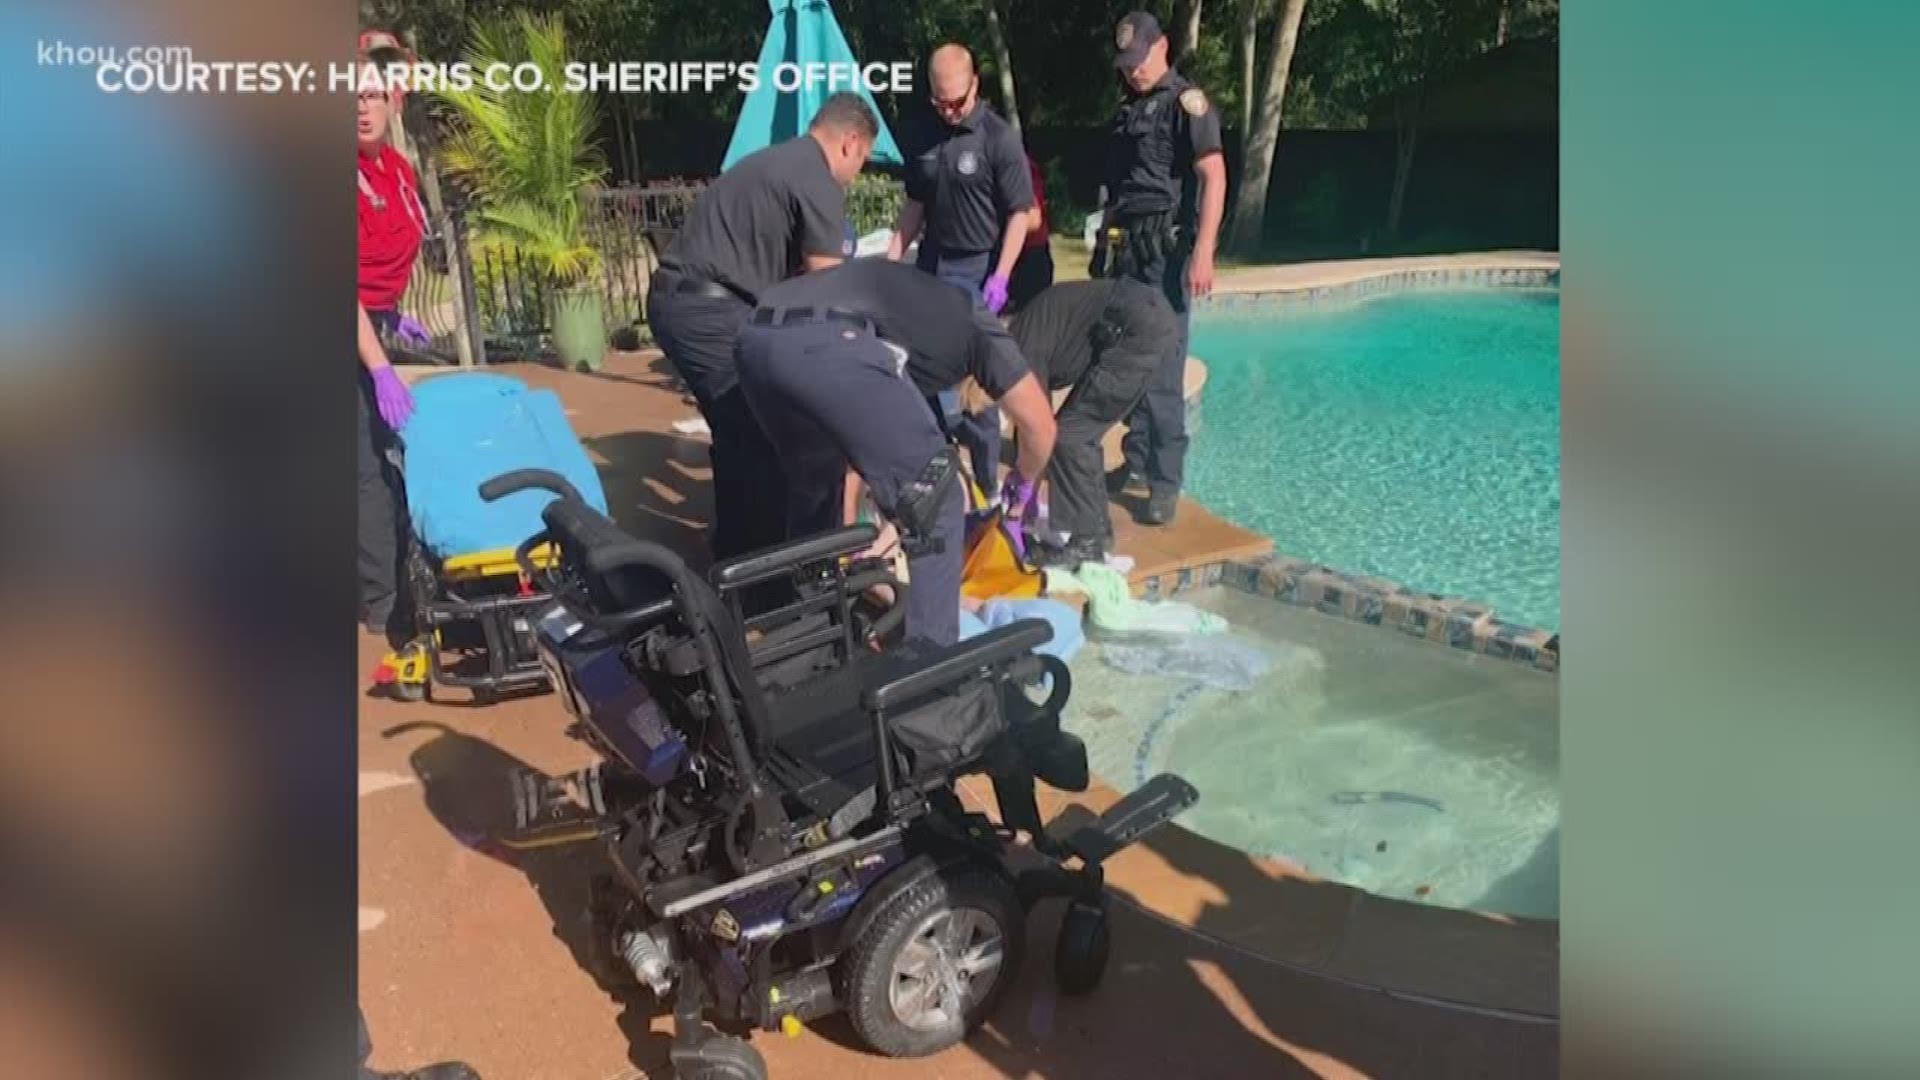 An 81-year-old paralyzed man was rescued from hot tub after he accidentally drove his motorized chair into the water.